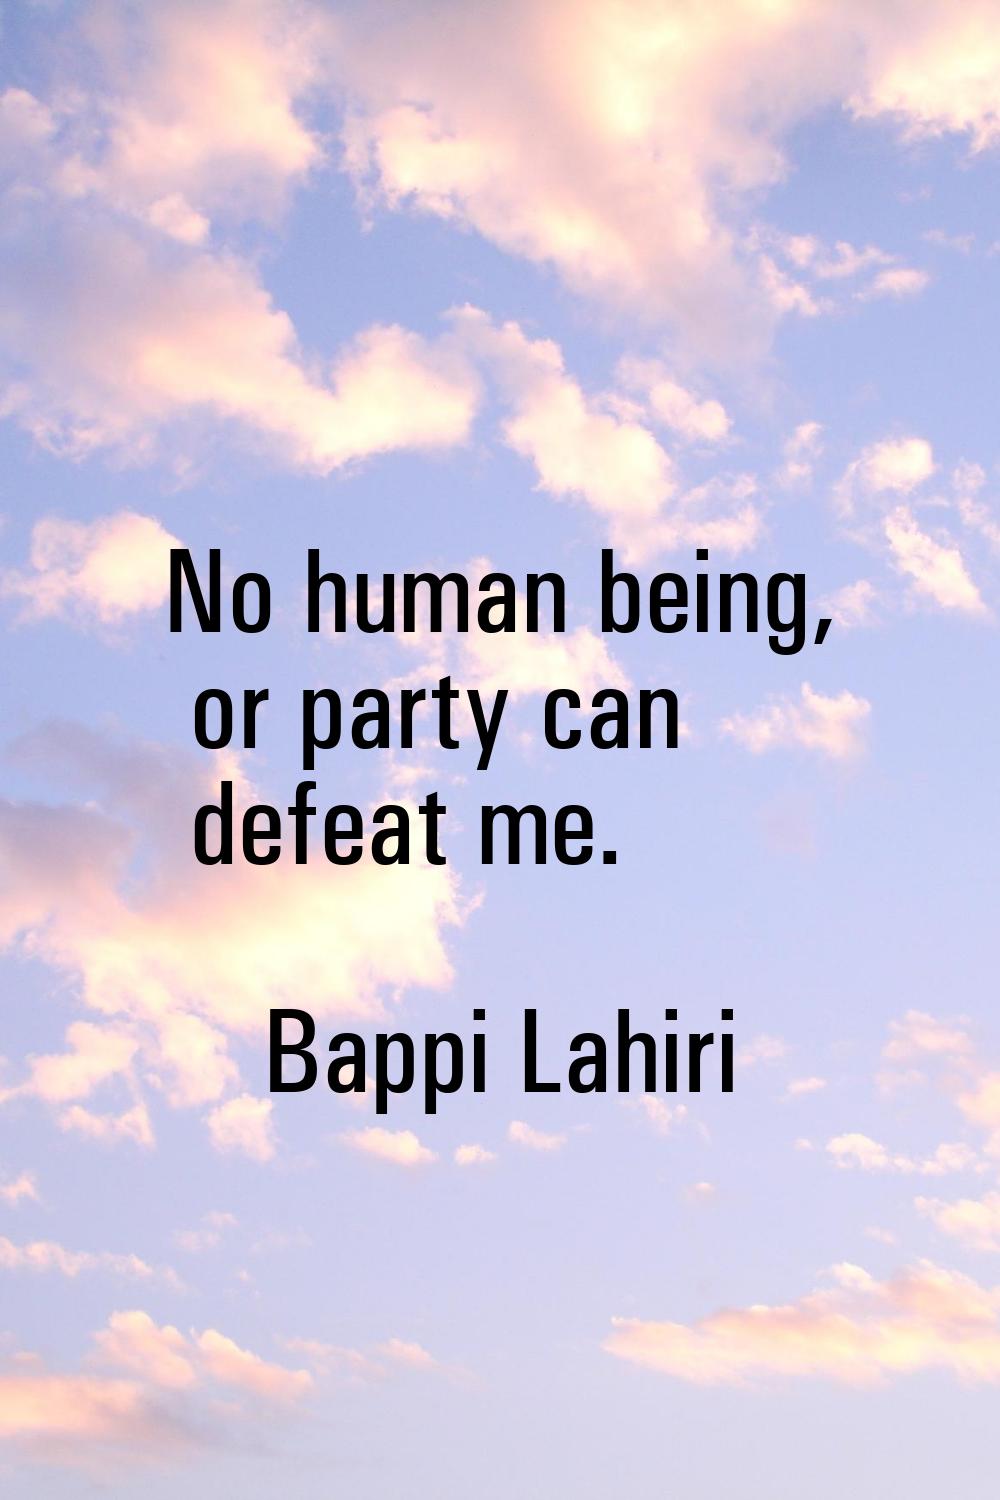 No human being, or party can defeat me.